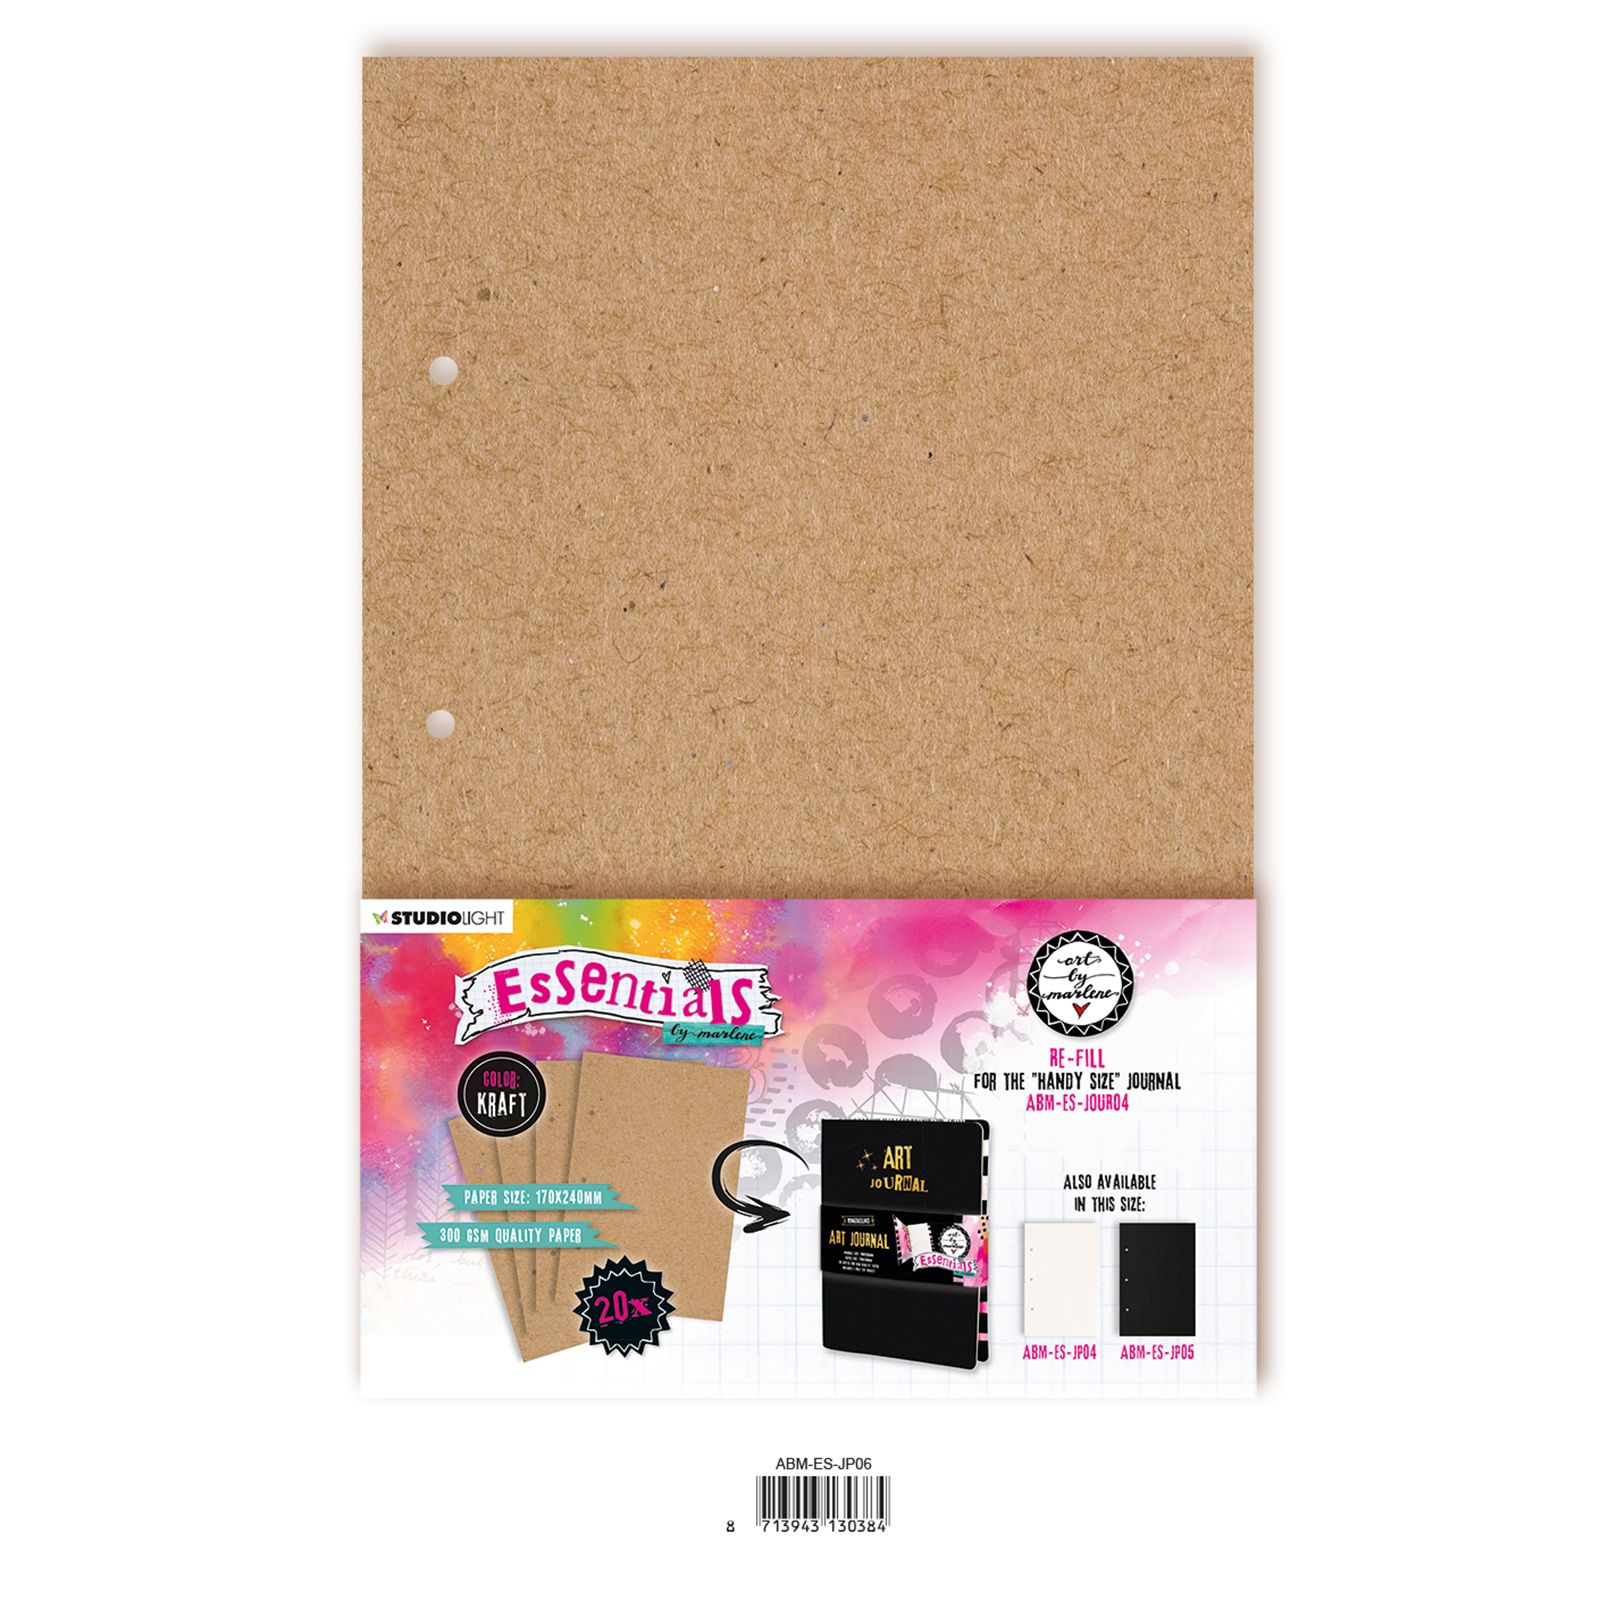 Studio Light • Essentials re-fill for The perfect size journal Kraft